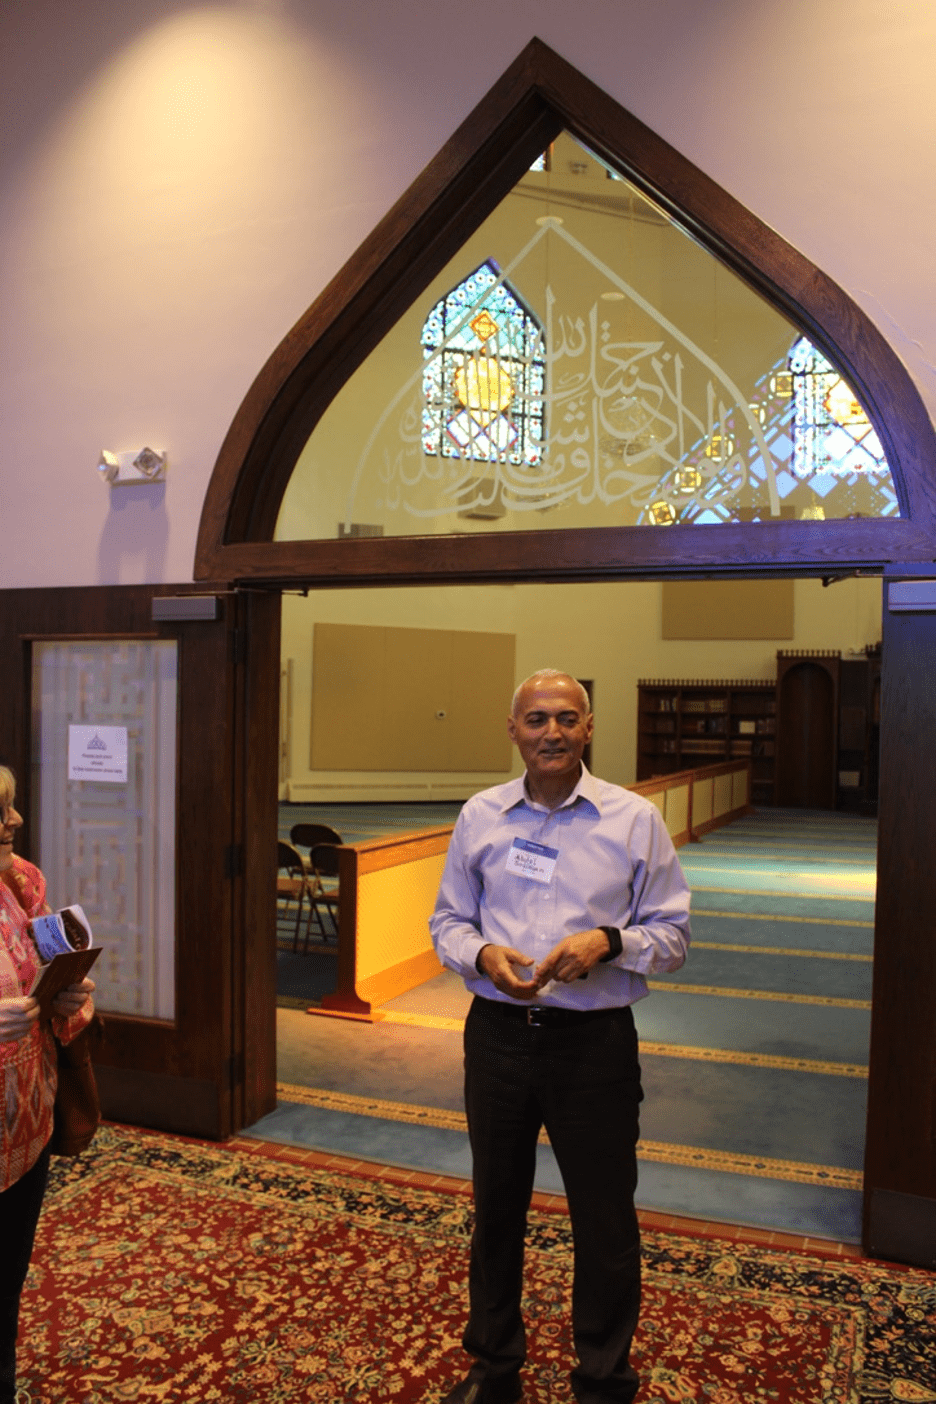 Dr. Abdel-Wahab Soliman leads a tour of the ICGT’s prayer facilities